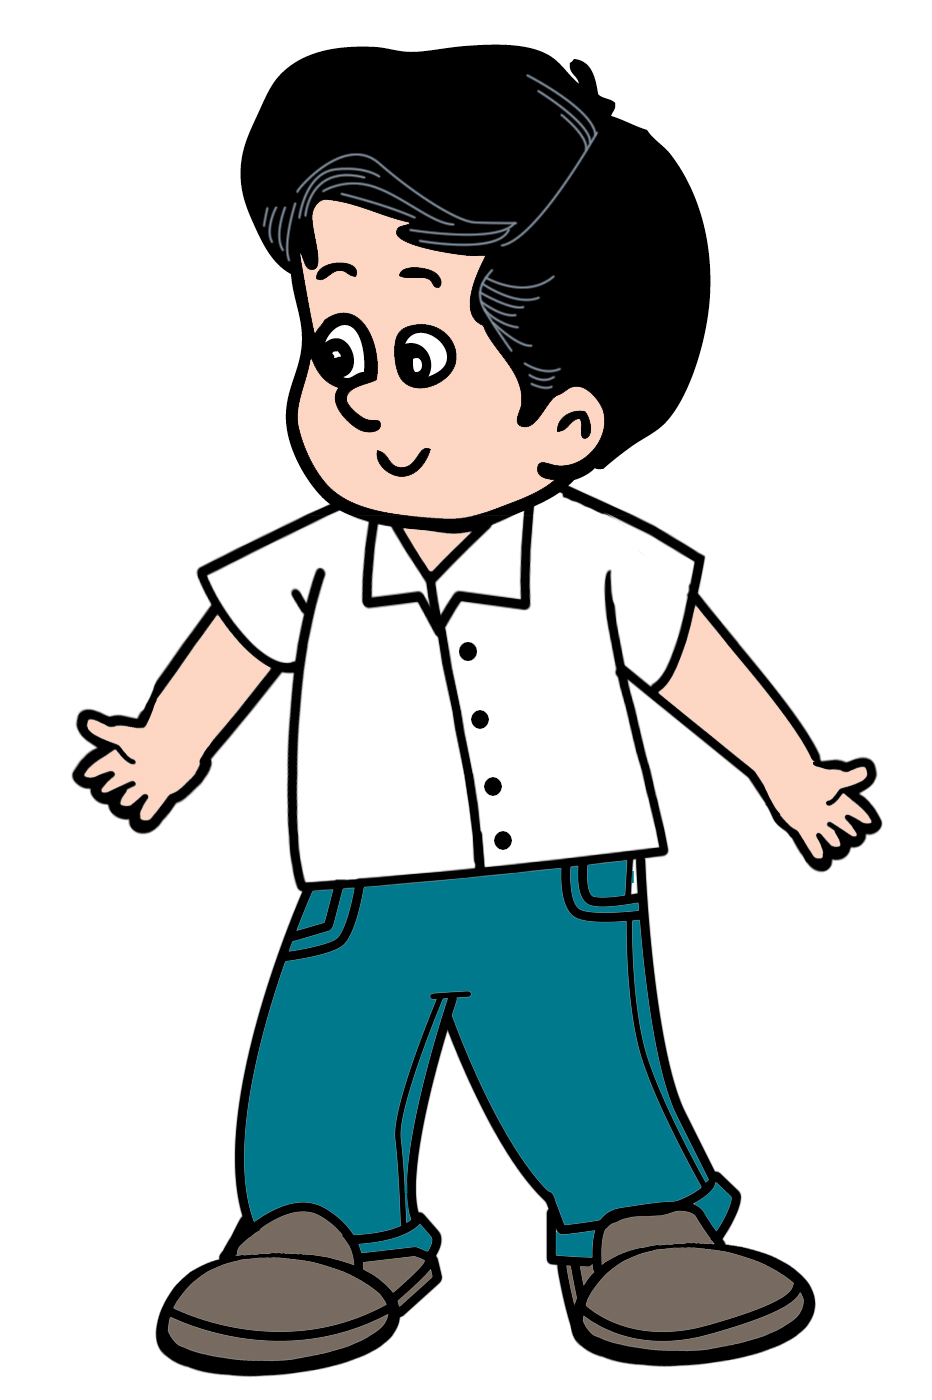 student clipart free vector - photo #11